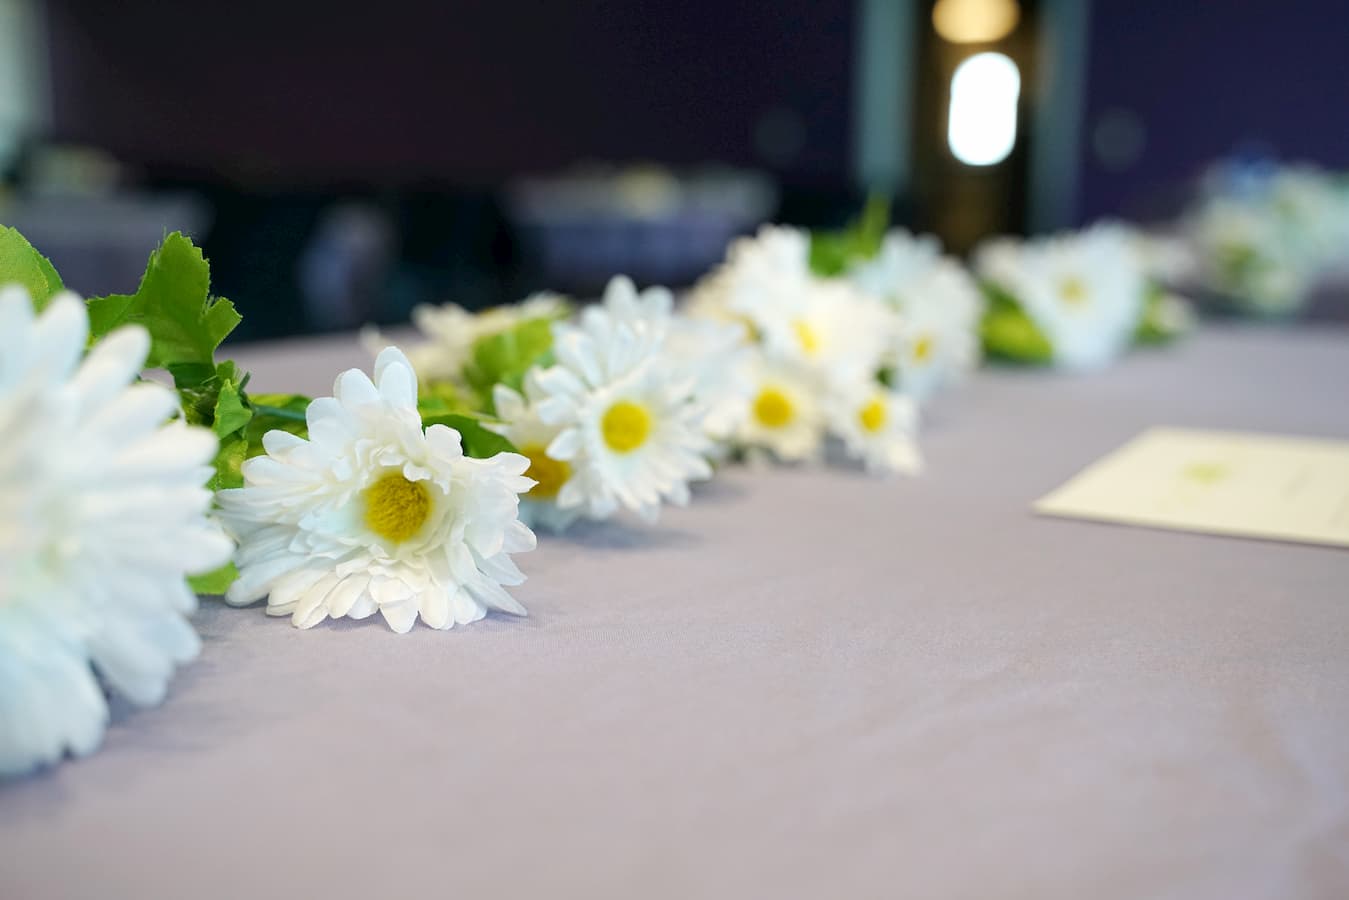 White daisy flowers laying on a table for the DIASY Award celebration.